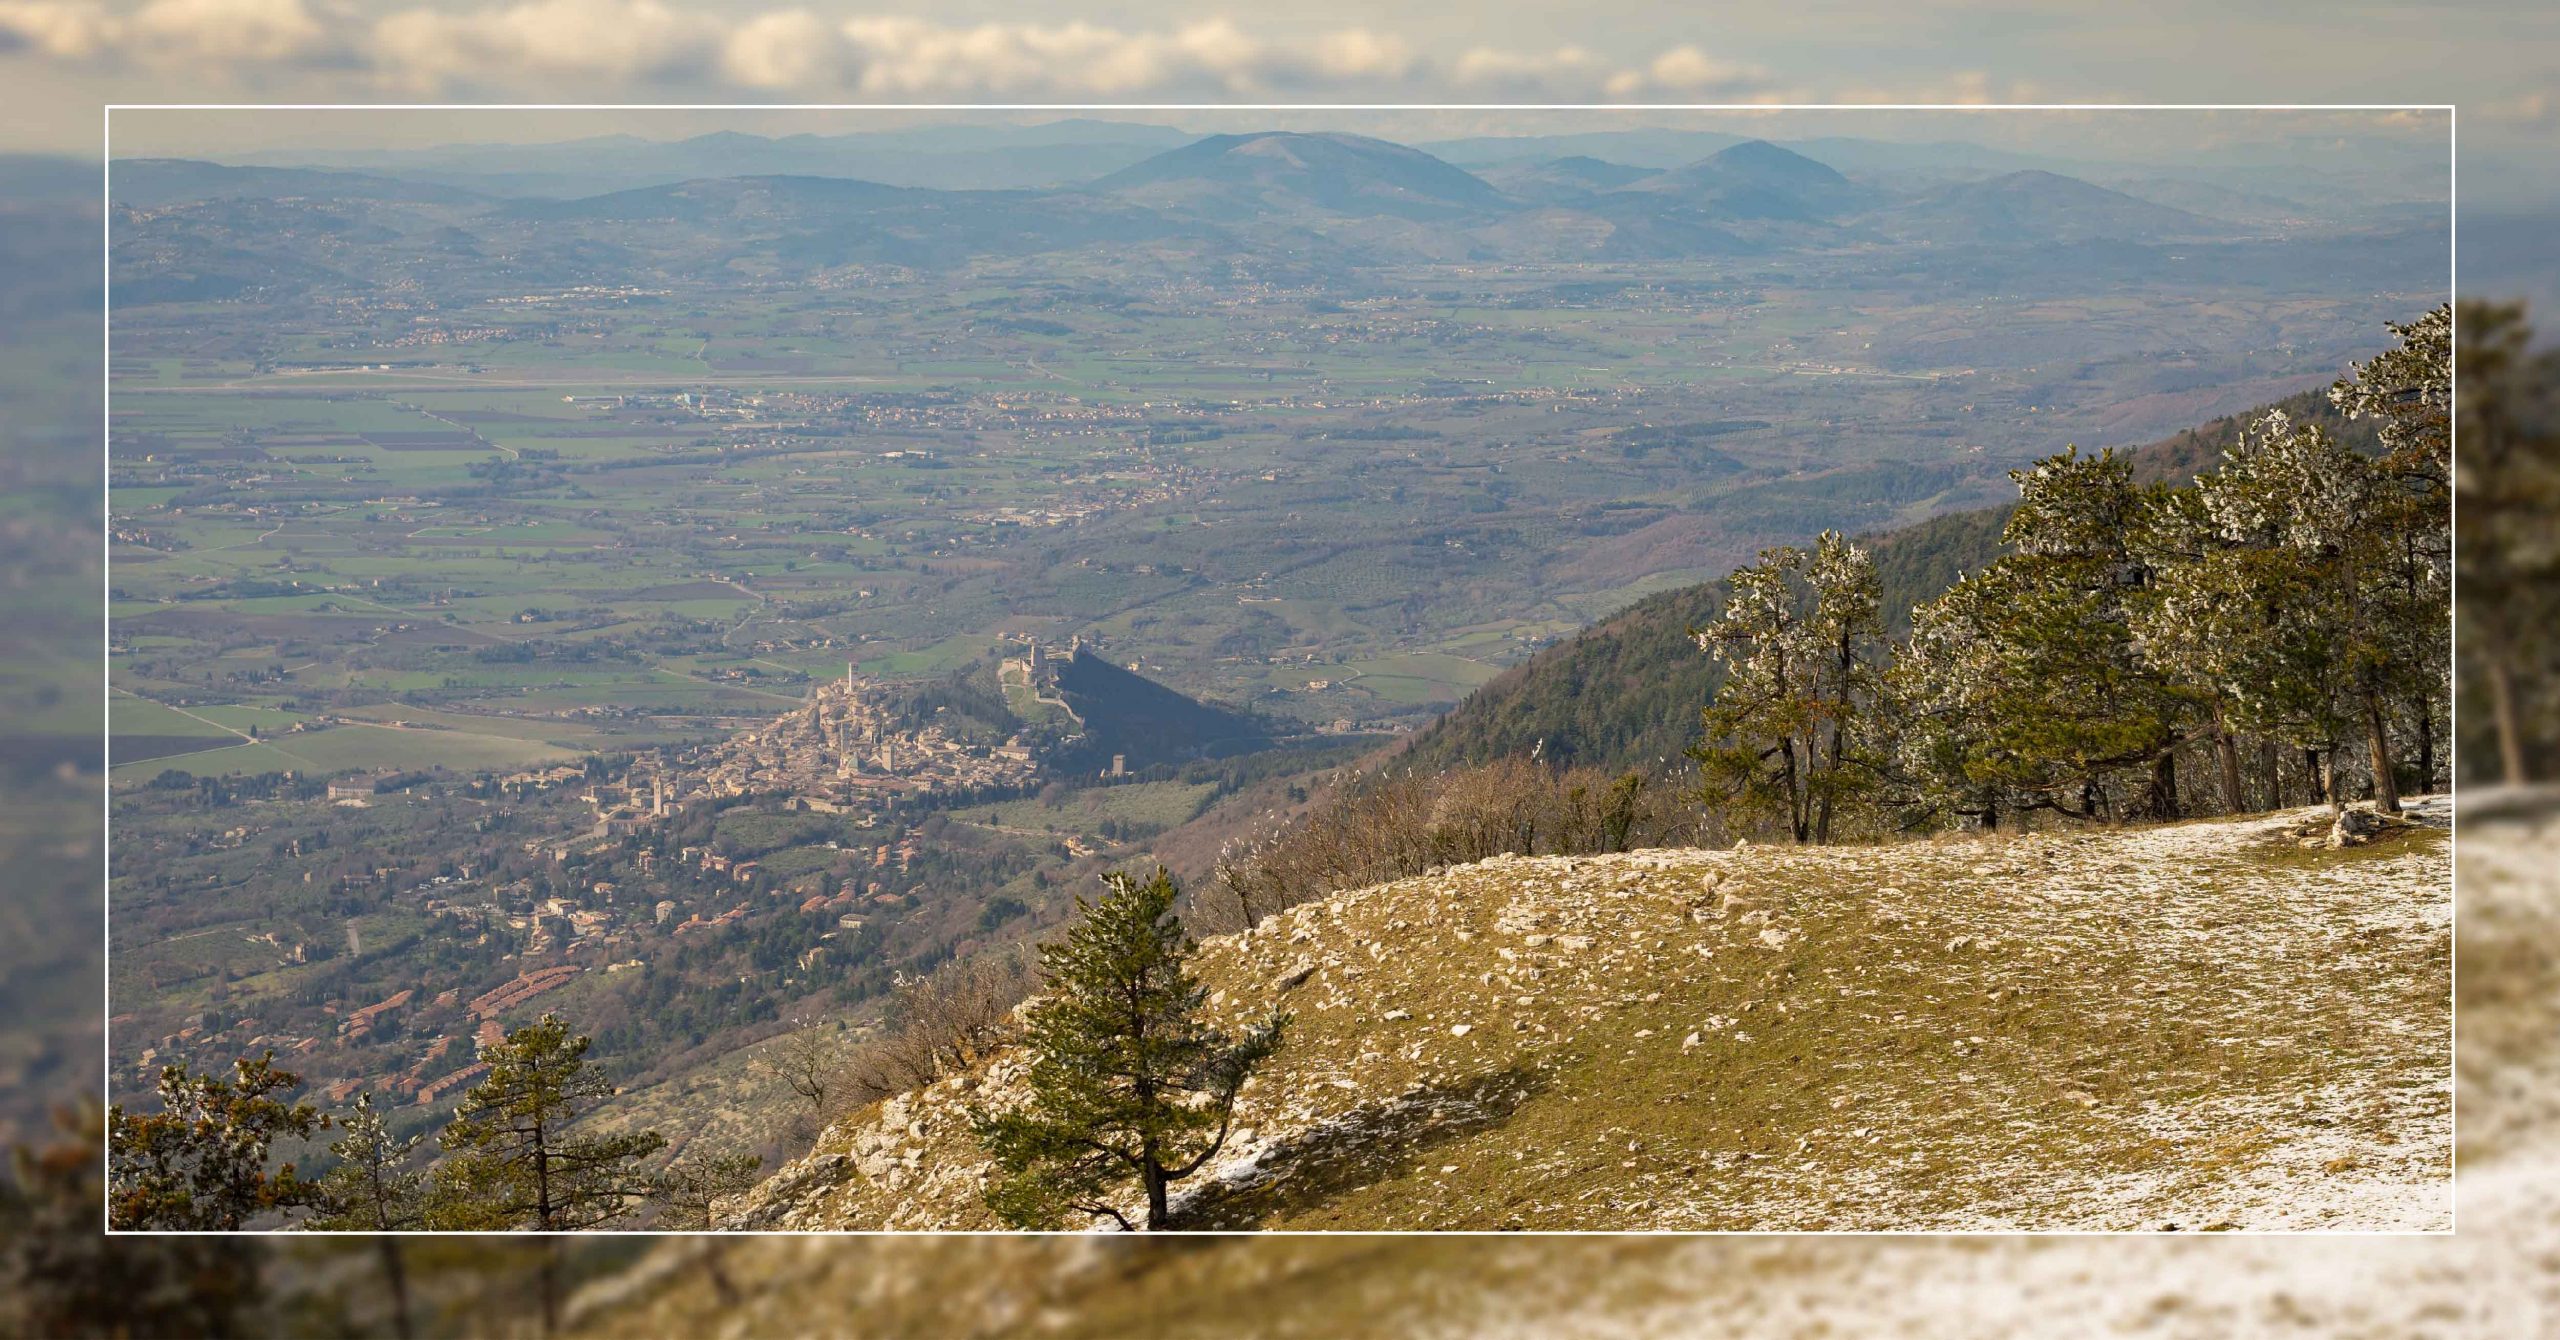 PANORAMI IN CAMMINO<br /> <font color="#aaaf95 ">Assisi | Parco Regionale del Monte Subasio</font>